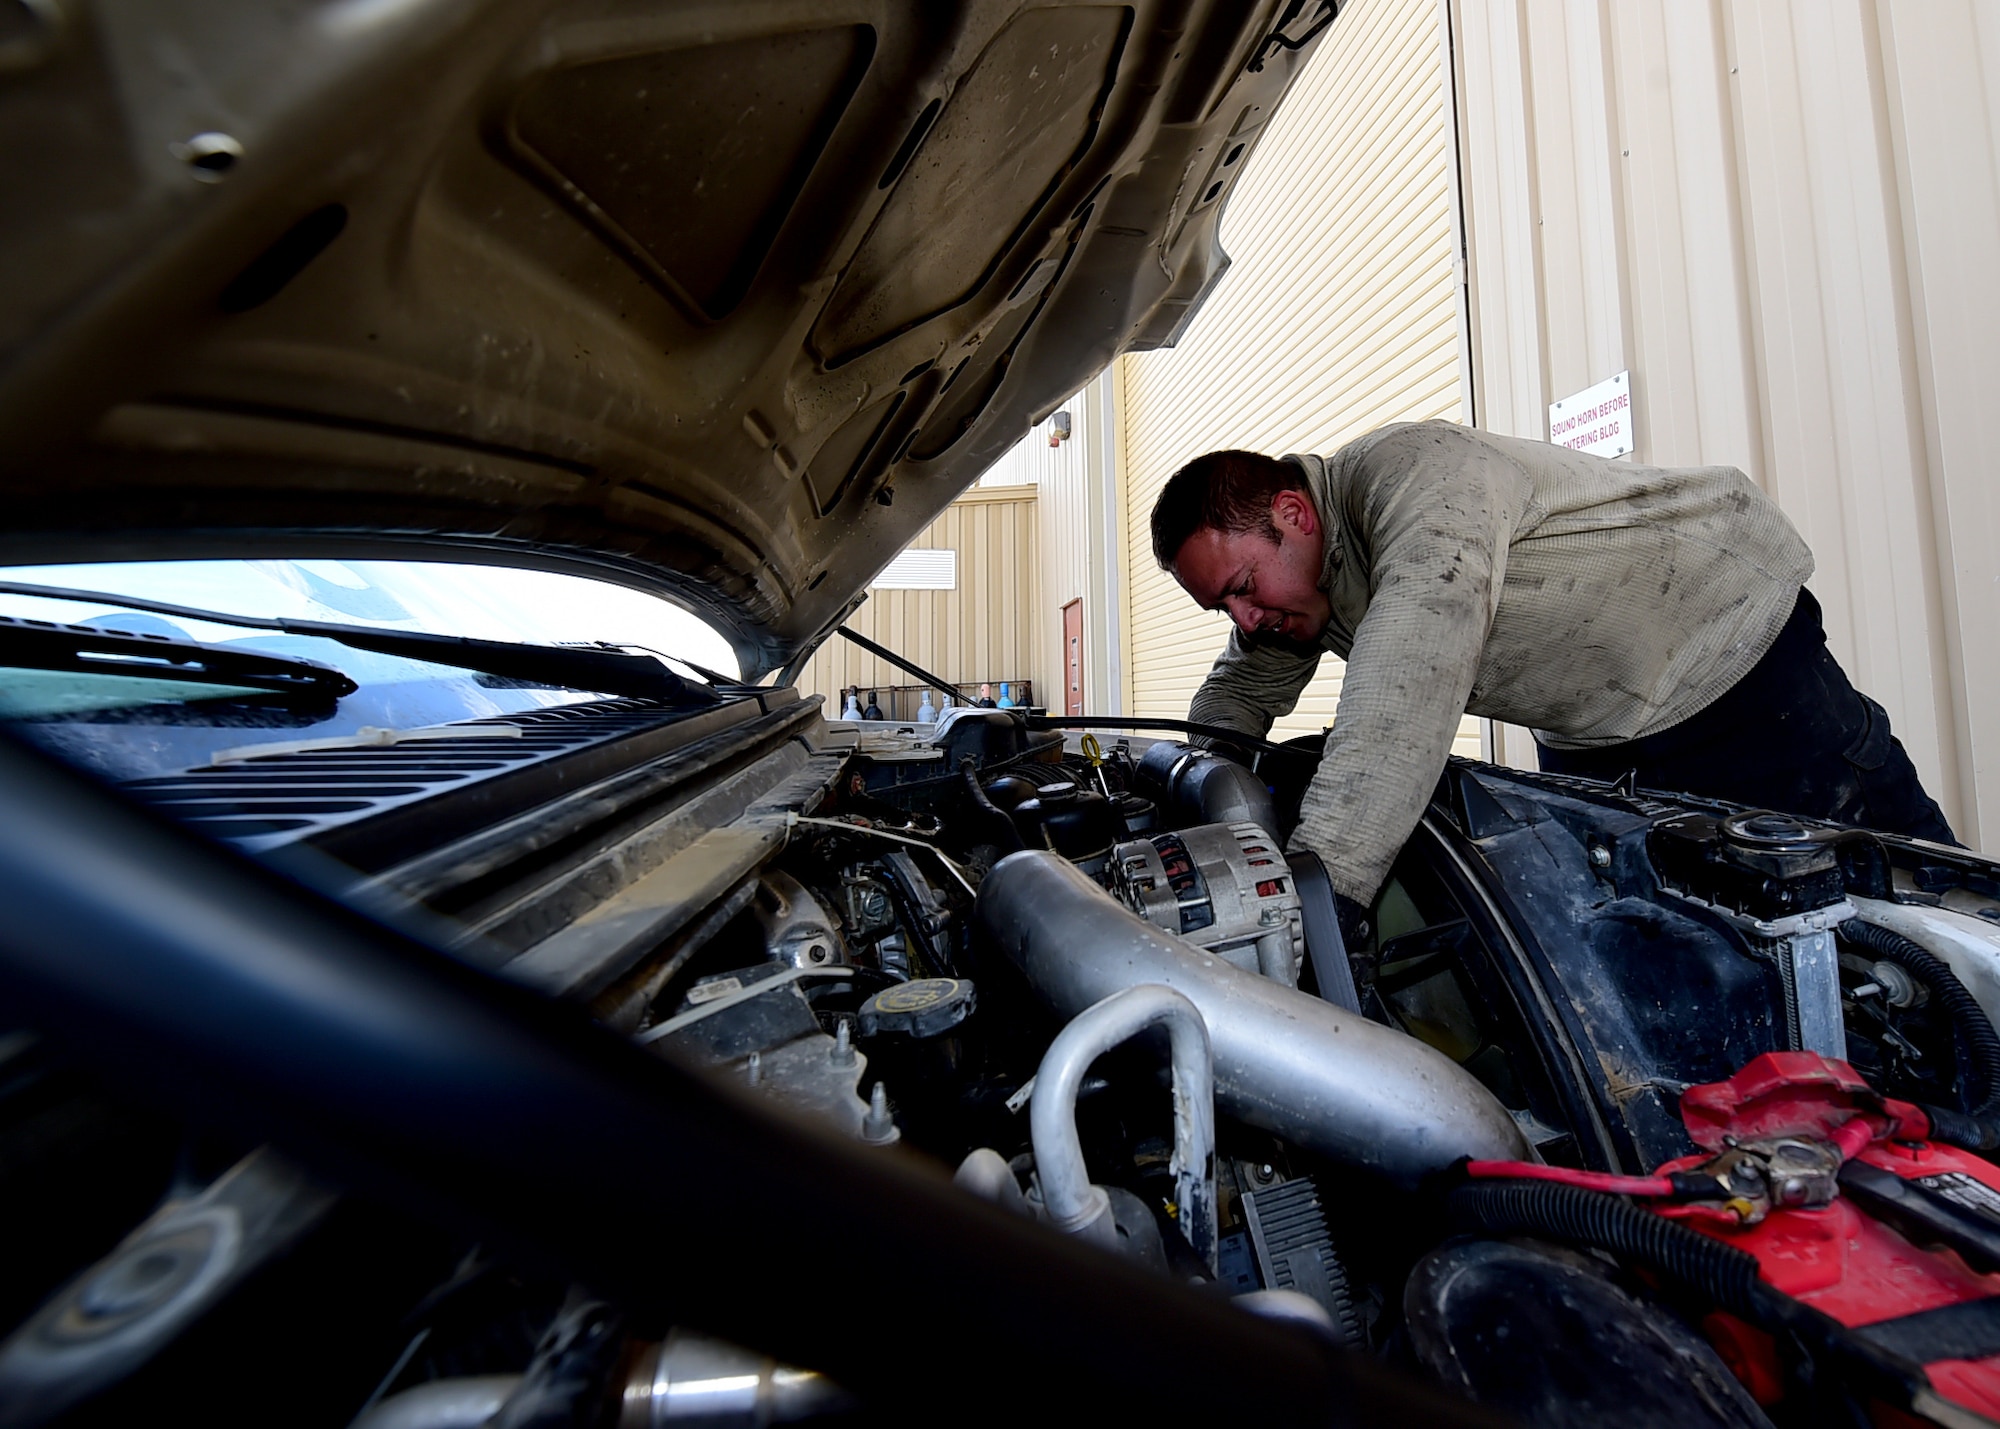 Staff Sgt. Justin Gentry, 386th Vehicle Management Flight, mission generation vehicular equipment maintenance journeyman, inspects a vehicle prior to conducting regularly scheduled maintenance at an undisclosed location in Southwest Asia, Jan. 4, 2016 supporting Operation INHERENT RESOLVE. The vehicle management flight performs regularly scheduled maintenance on more than 700 vehicles throughout the 386th Air Expeditionary Wing. (U.S. Air Force photo by Staff Sgt. Jerilyn Quintanilla)